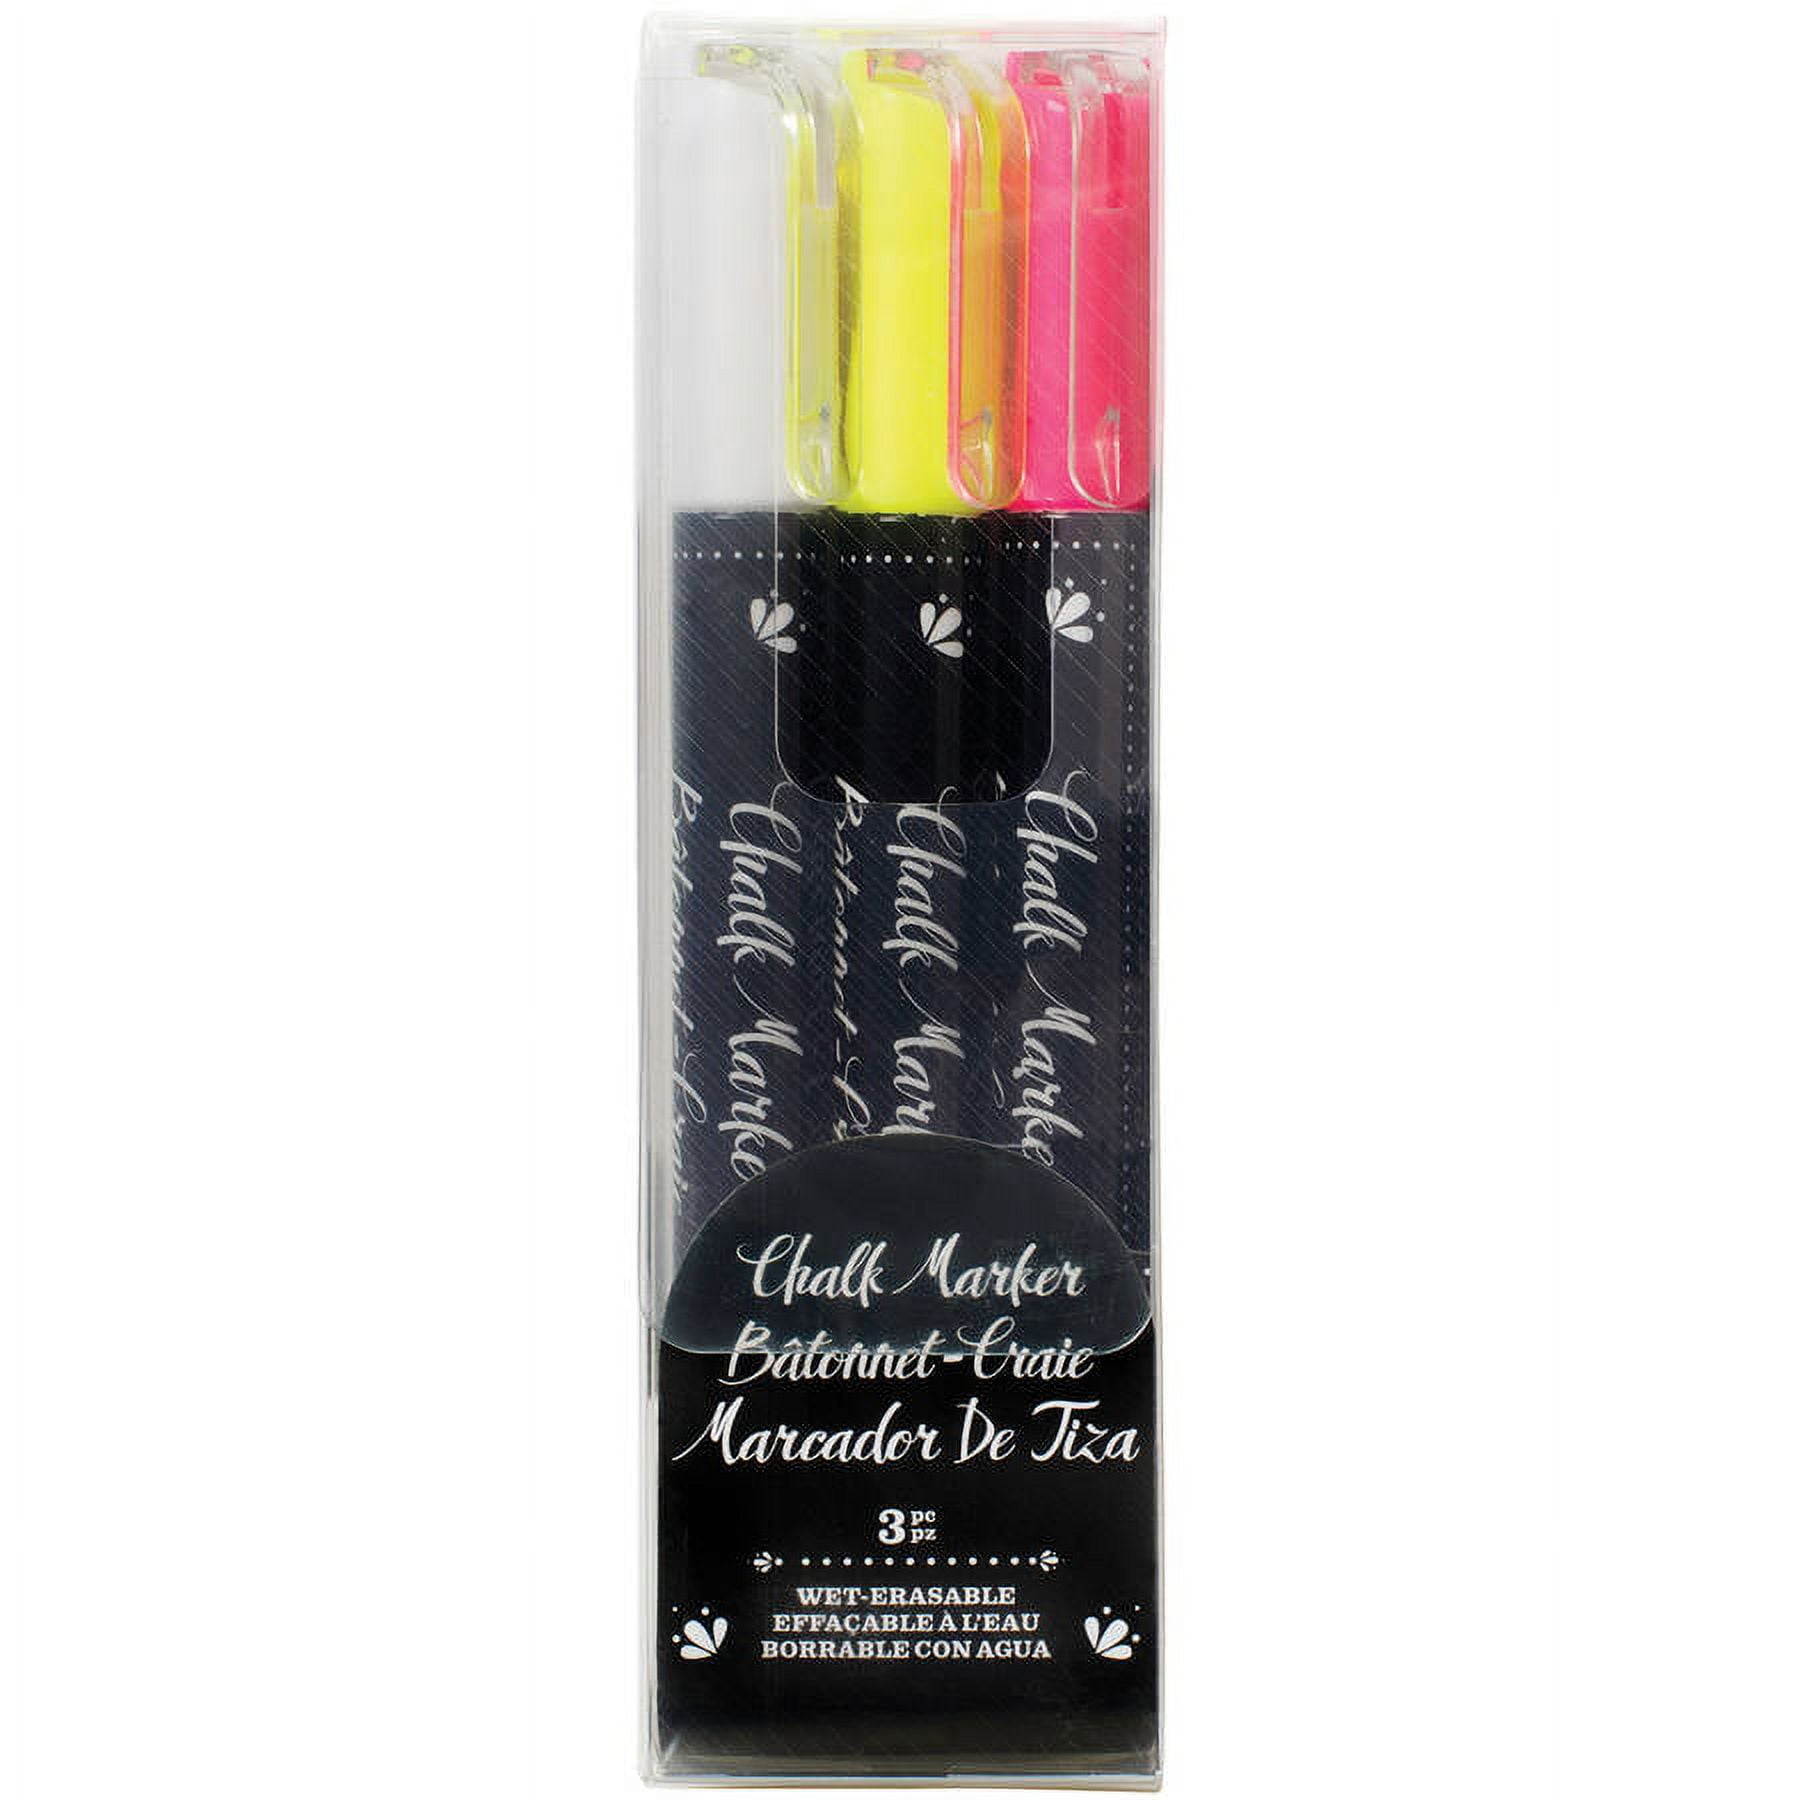 American Crafts Erasable Chalk Makers White, Craft Supplies Chalk Markers  For ChalkBoard Dry Erase Boards Windows Glass Mirrors Ceramic Metal Chalk